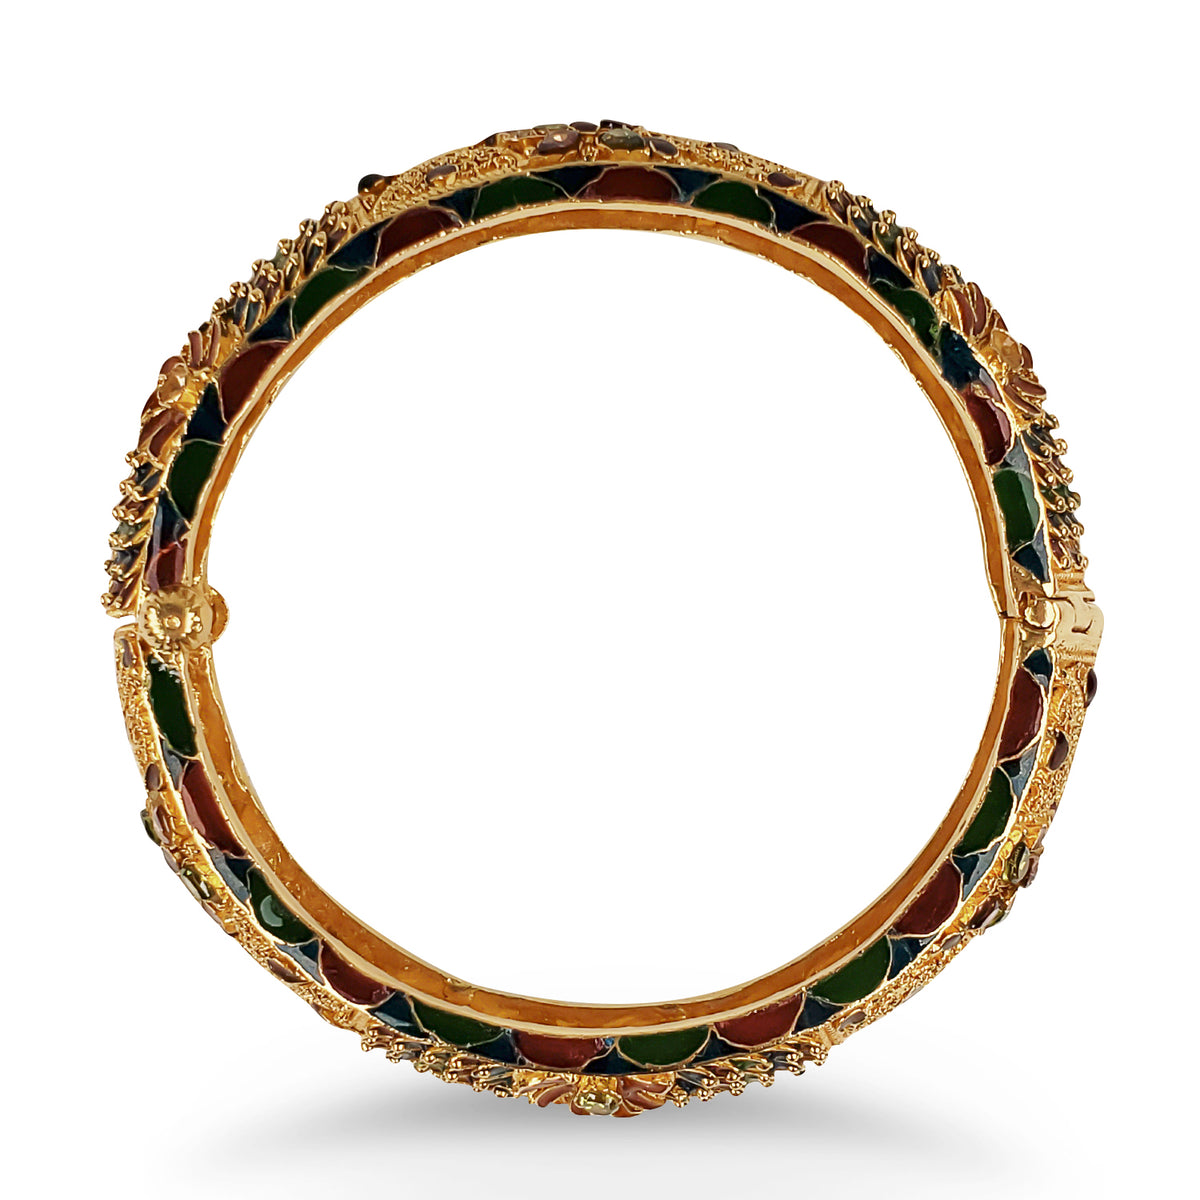 Multi-color stone Bangle Bracelet set in an 18kt yellow gold